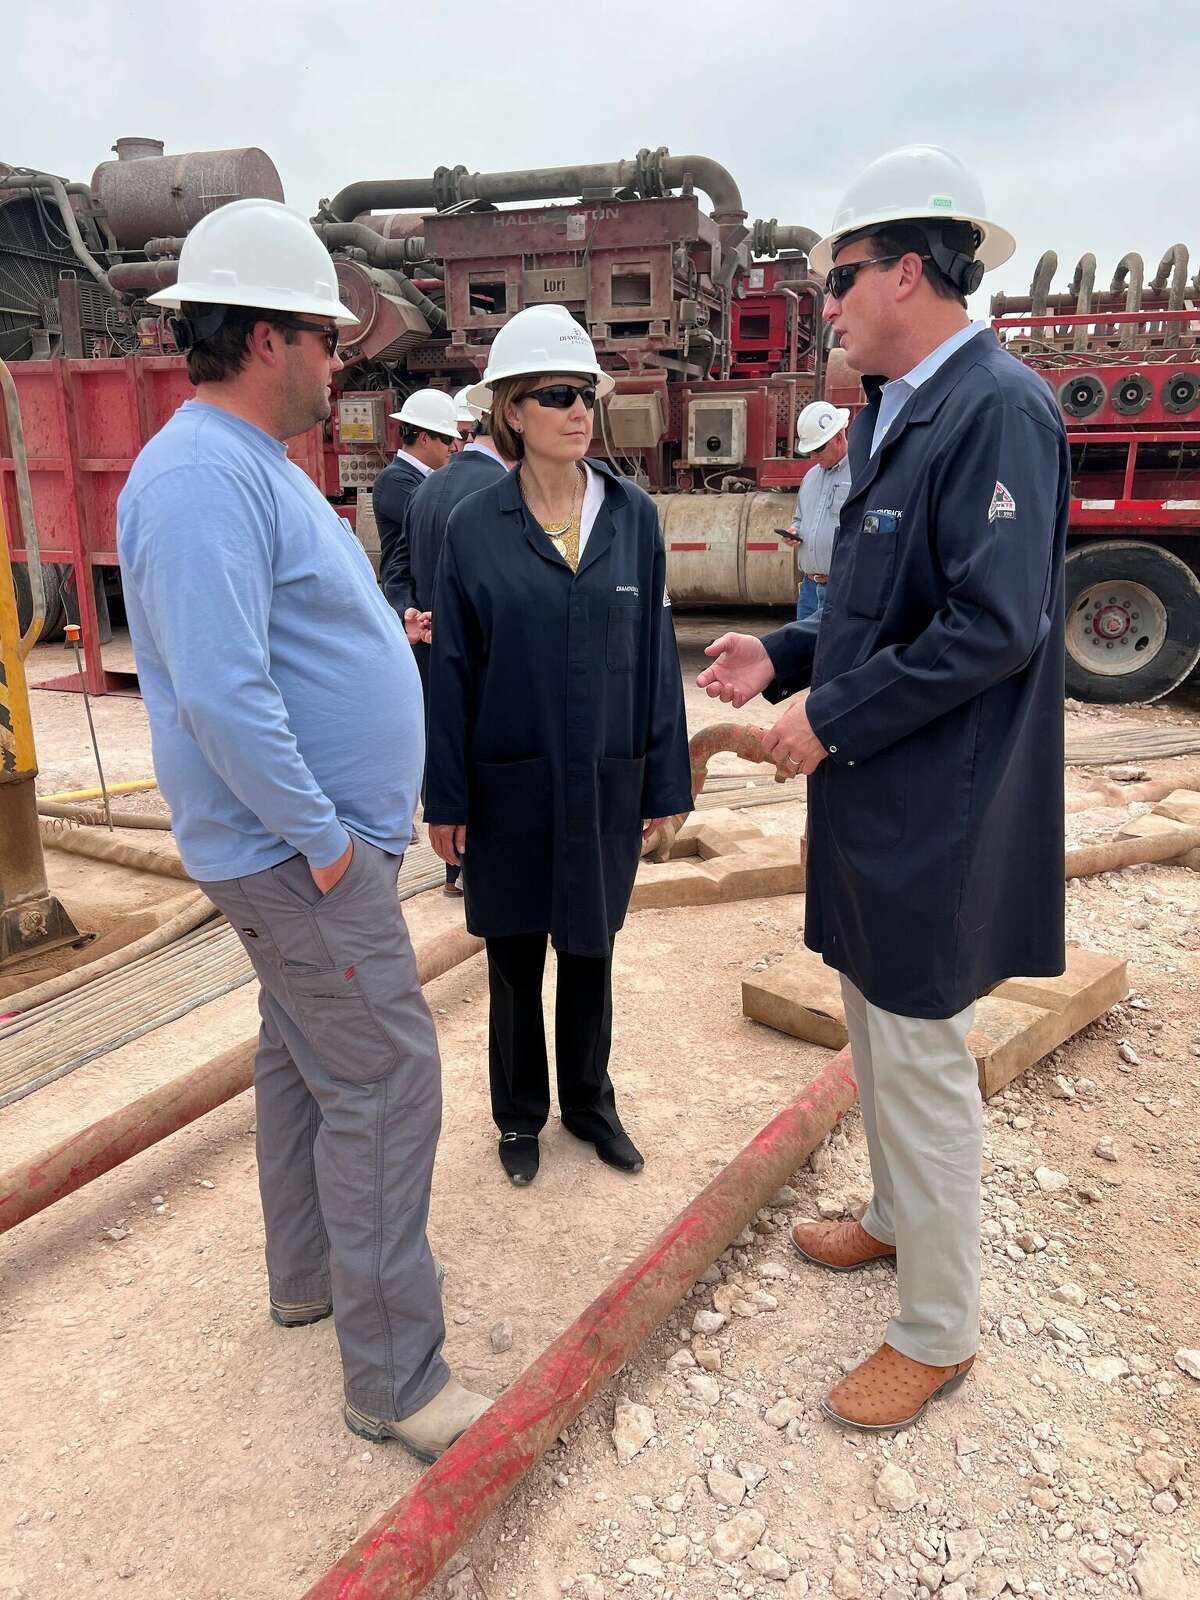 Rep. Pfluger and Energy & Commerce Republican Leader Cathy McMorris Rodgers tour Diamondback Energy Frac Site. (Left to Right: Diamondback Energy VP of Completions Hunter Landers, Republican Leader Cathy McMorris Rodgers, Rep. August Pfluger).